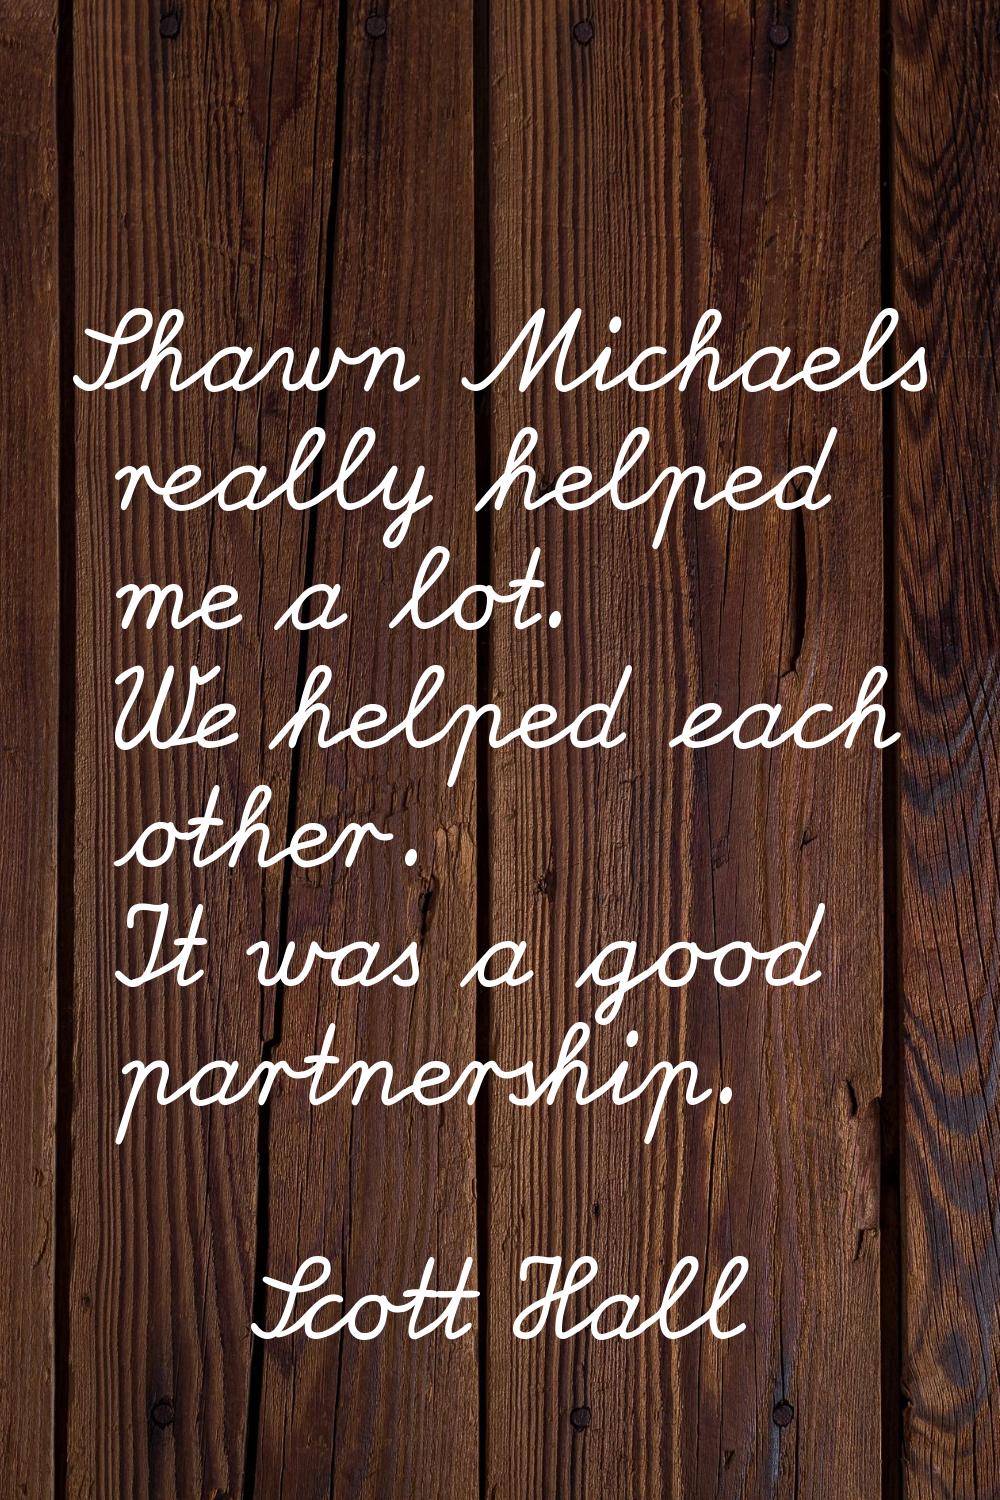 Shawn Michaels really helped me a lot. We helped each other. It was a good partnership.